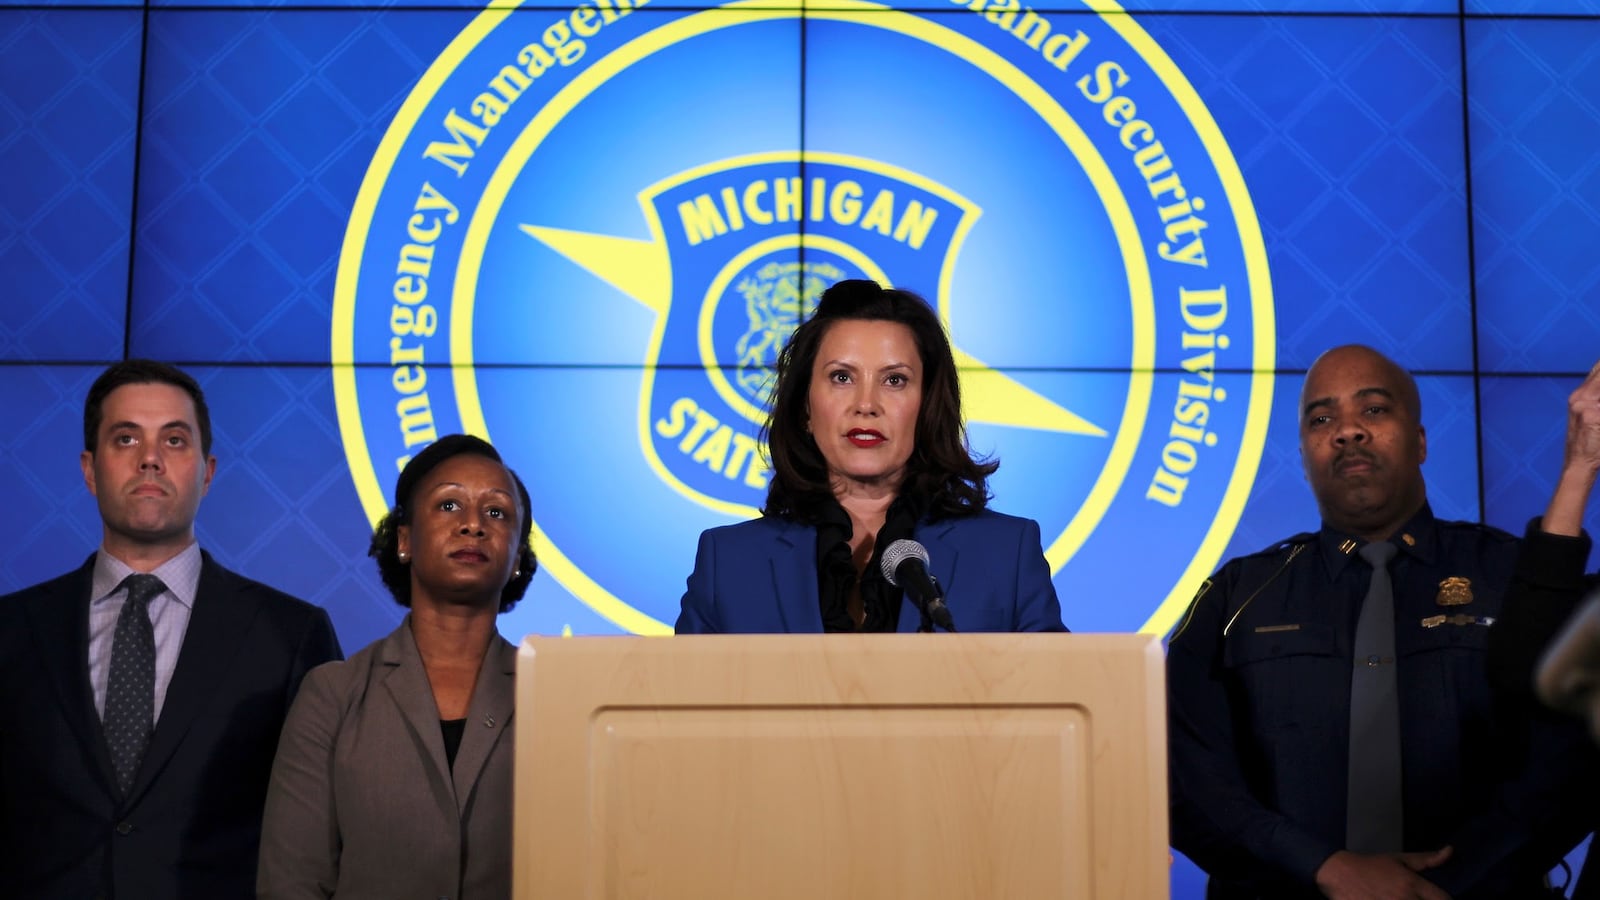 Gov. Gretchen Whitmer issued new guidance for schools and other organizations after the first cases of COVID-19 were reported in Michigan.